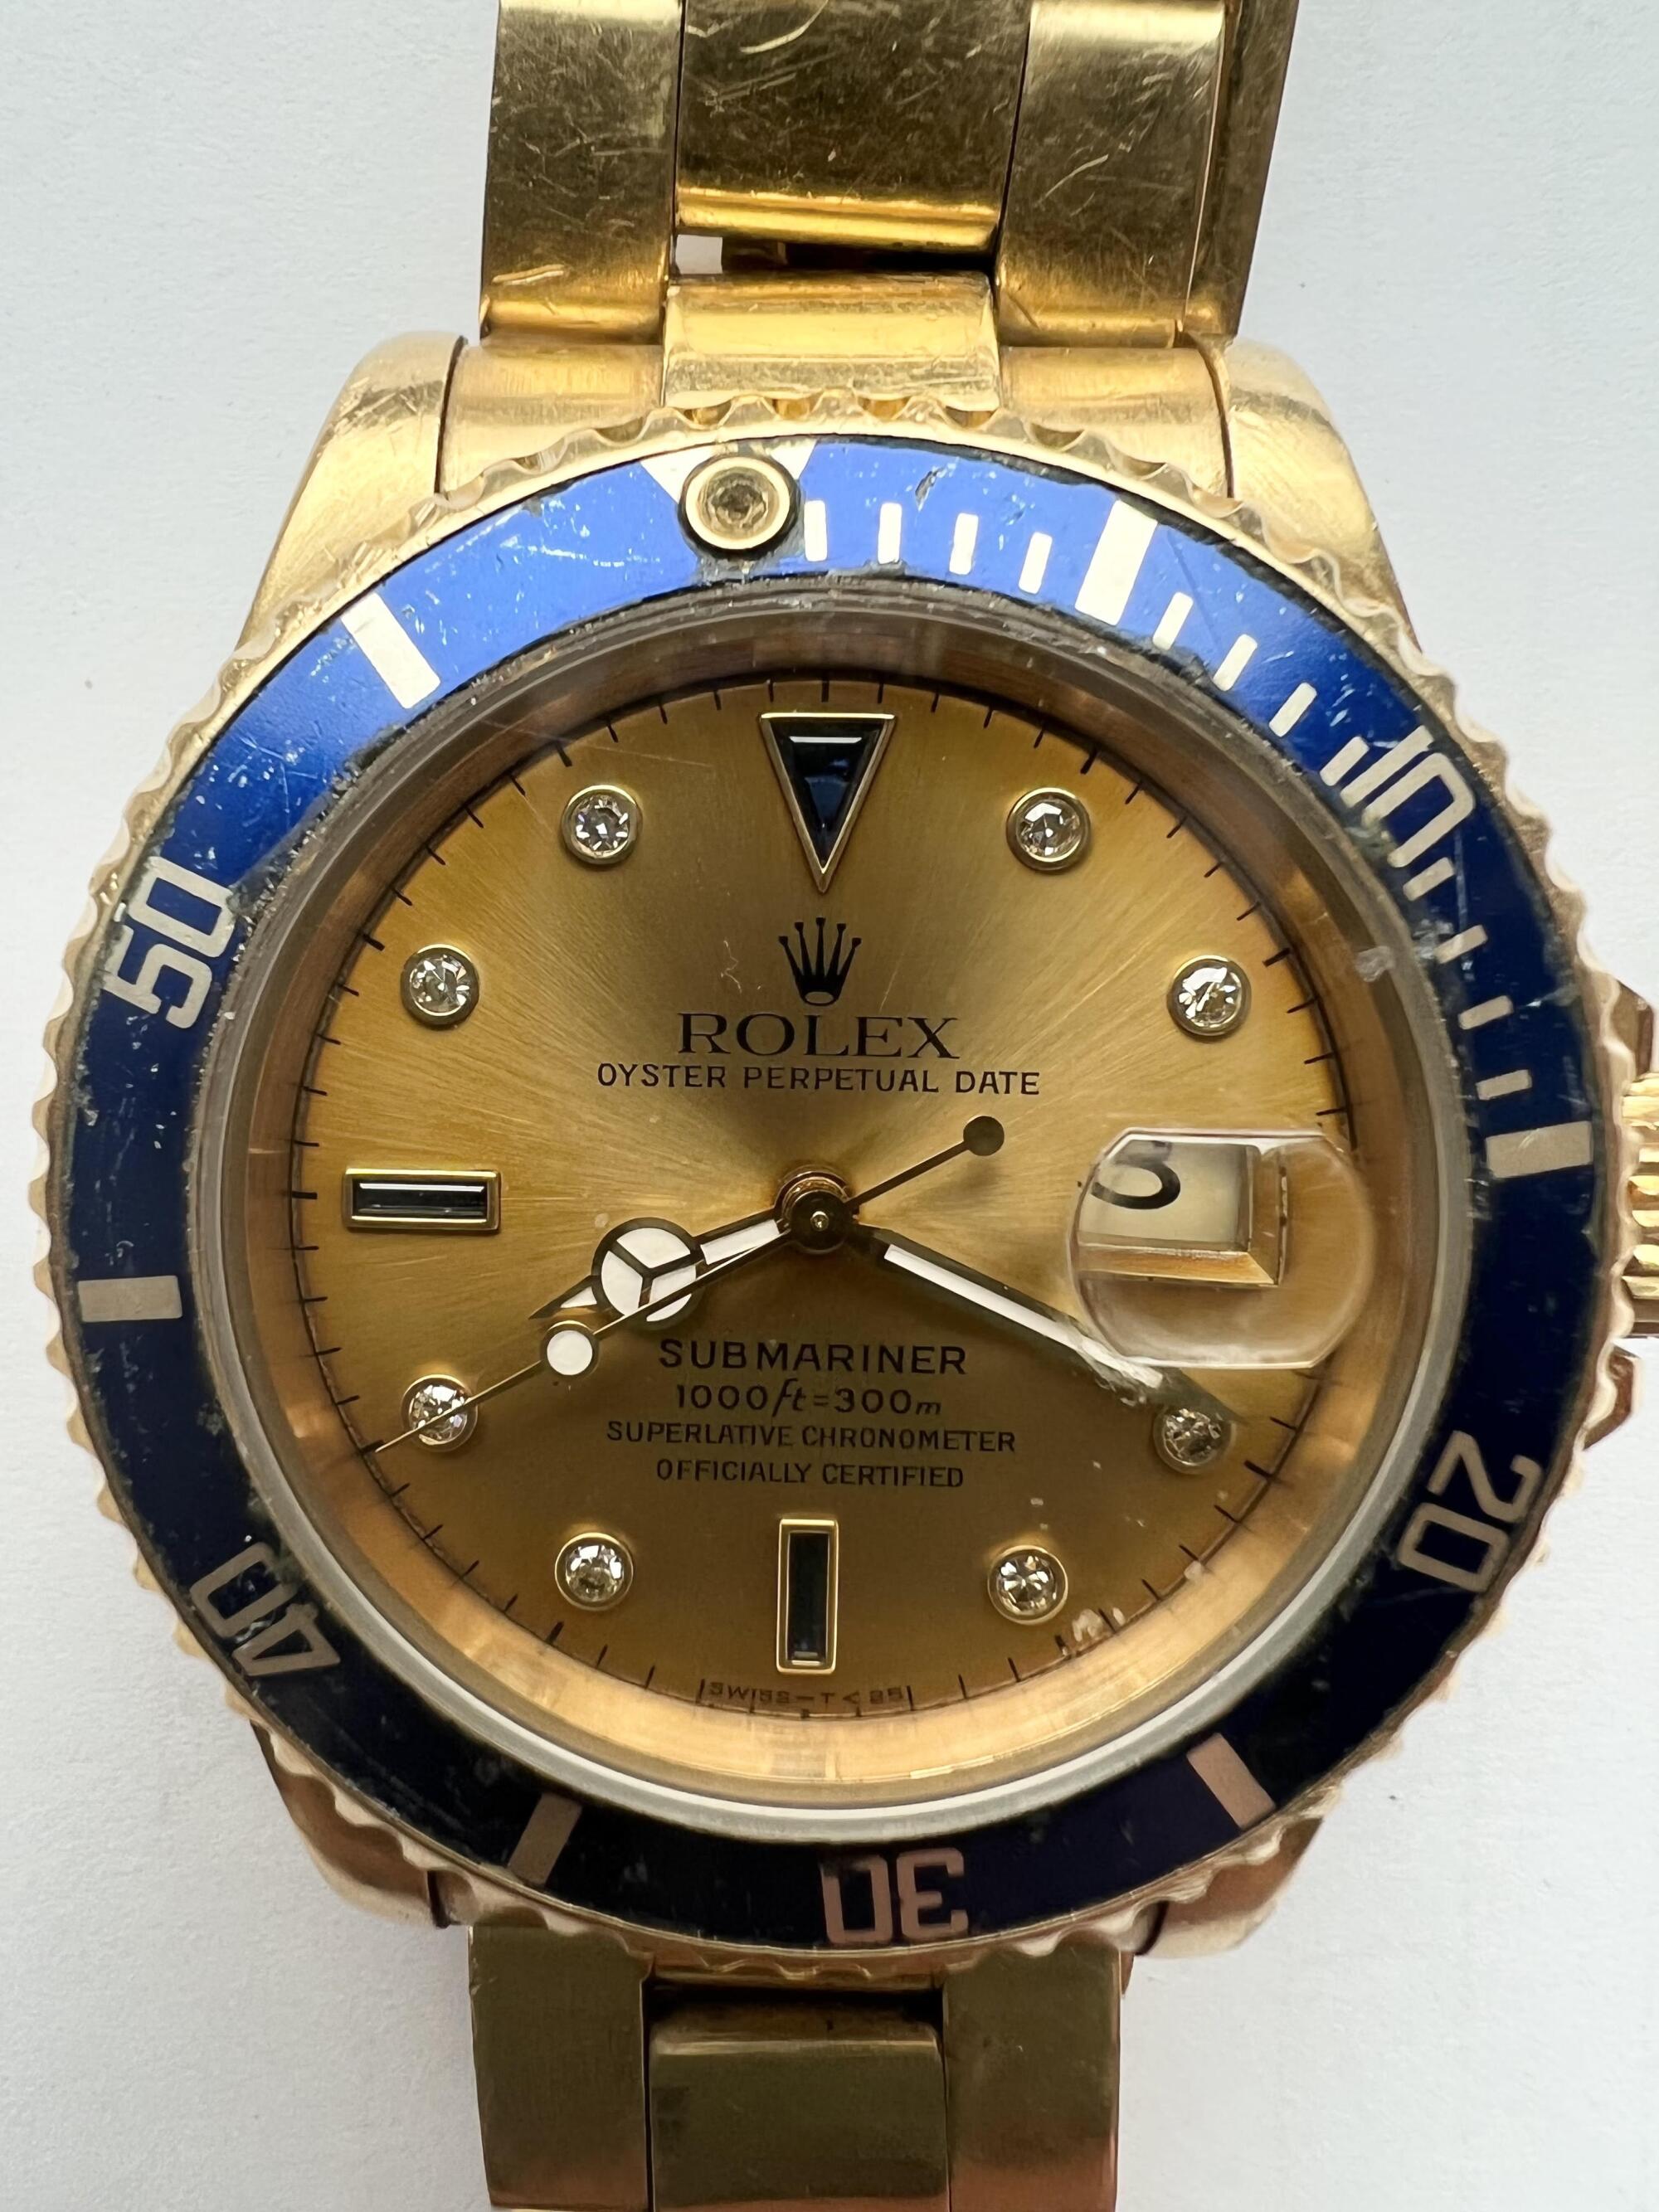 A photo of Mark Cardegnio Jr.'s Rolex Submariner, which he claims Anthony Farrer never returned.